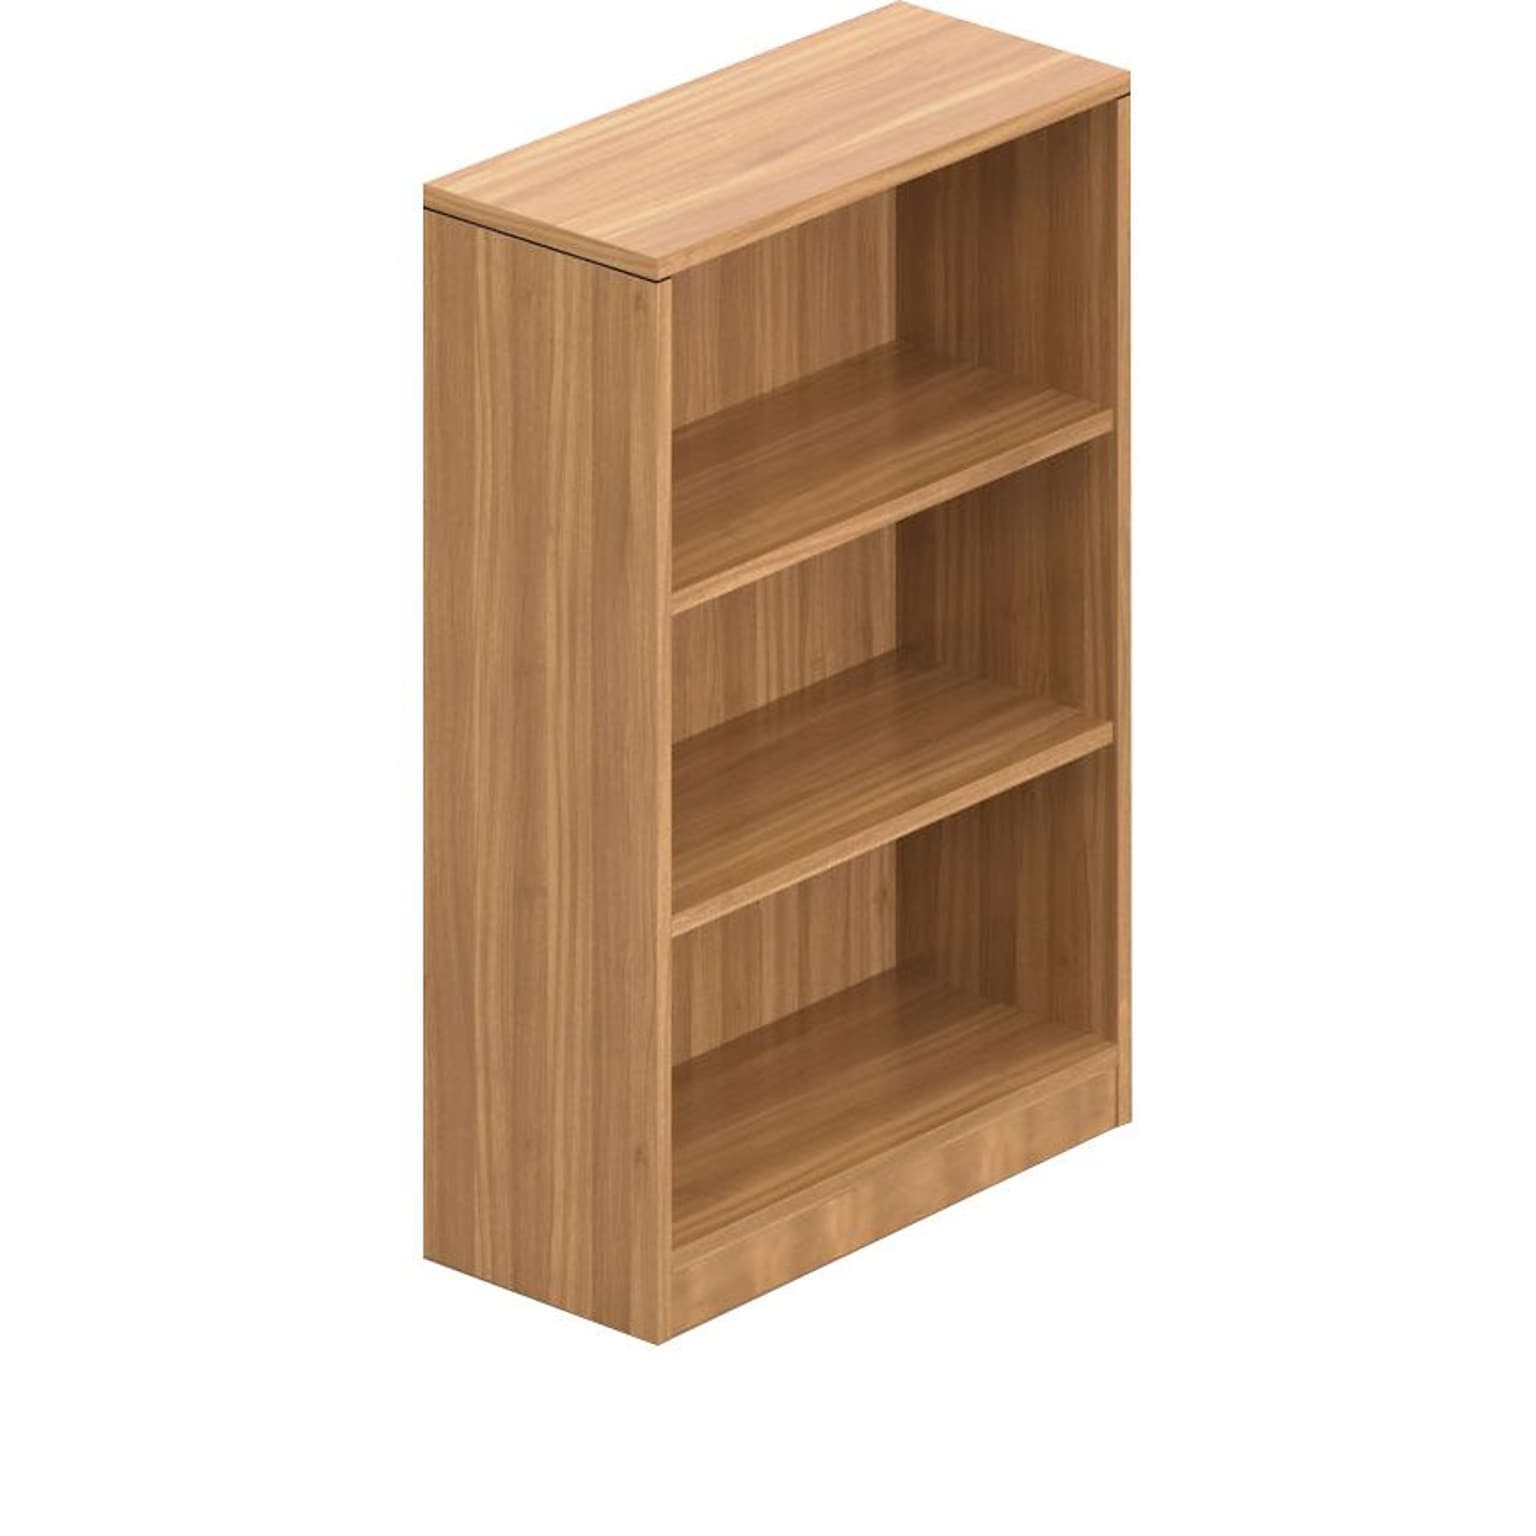 Offices to Go Superior Laminate 48H 2-Shelf Bookcase with Adjustable Shelves, Autumn Walnut (TDSL48BC-AWL)